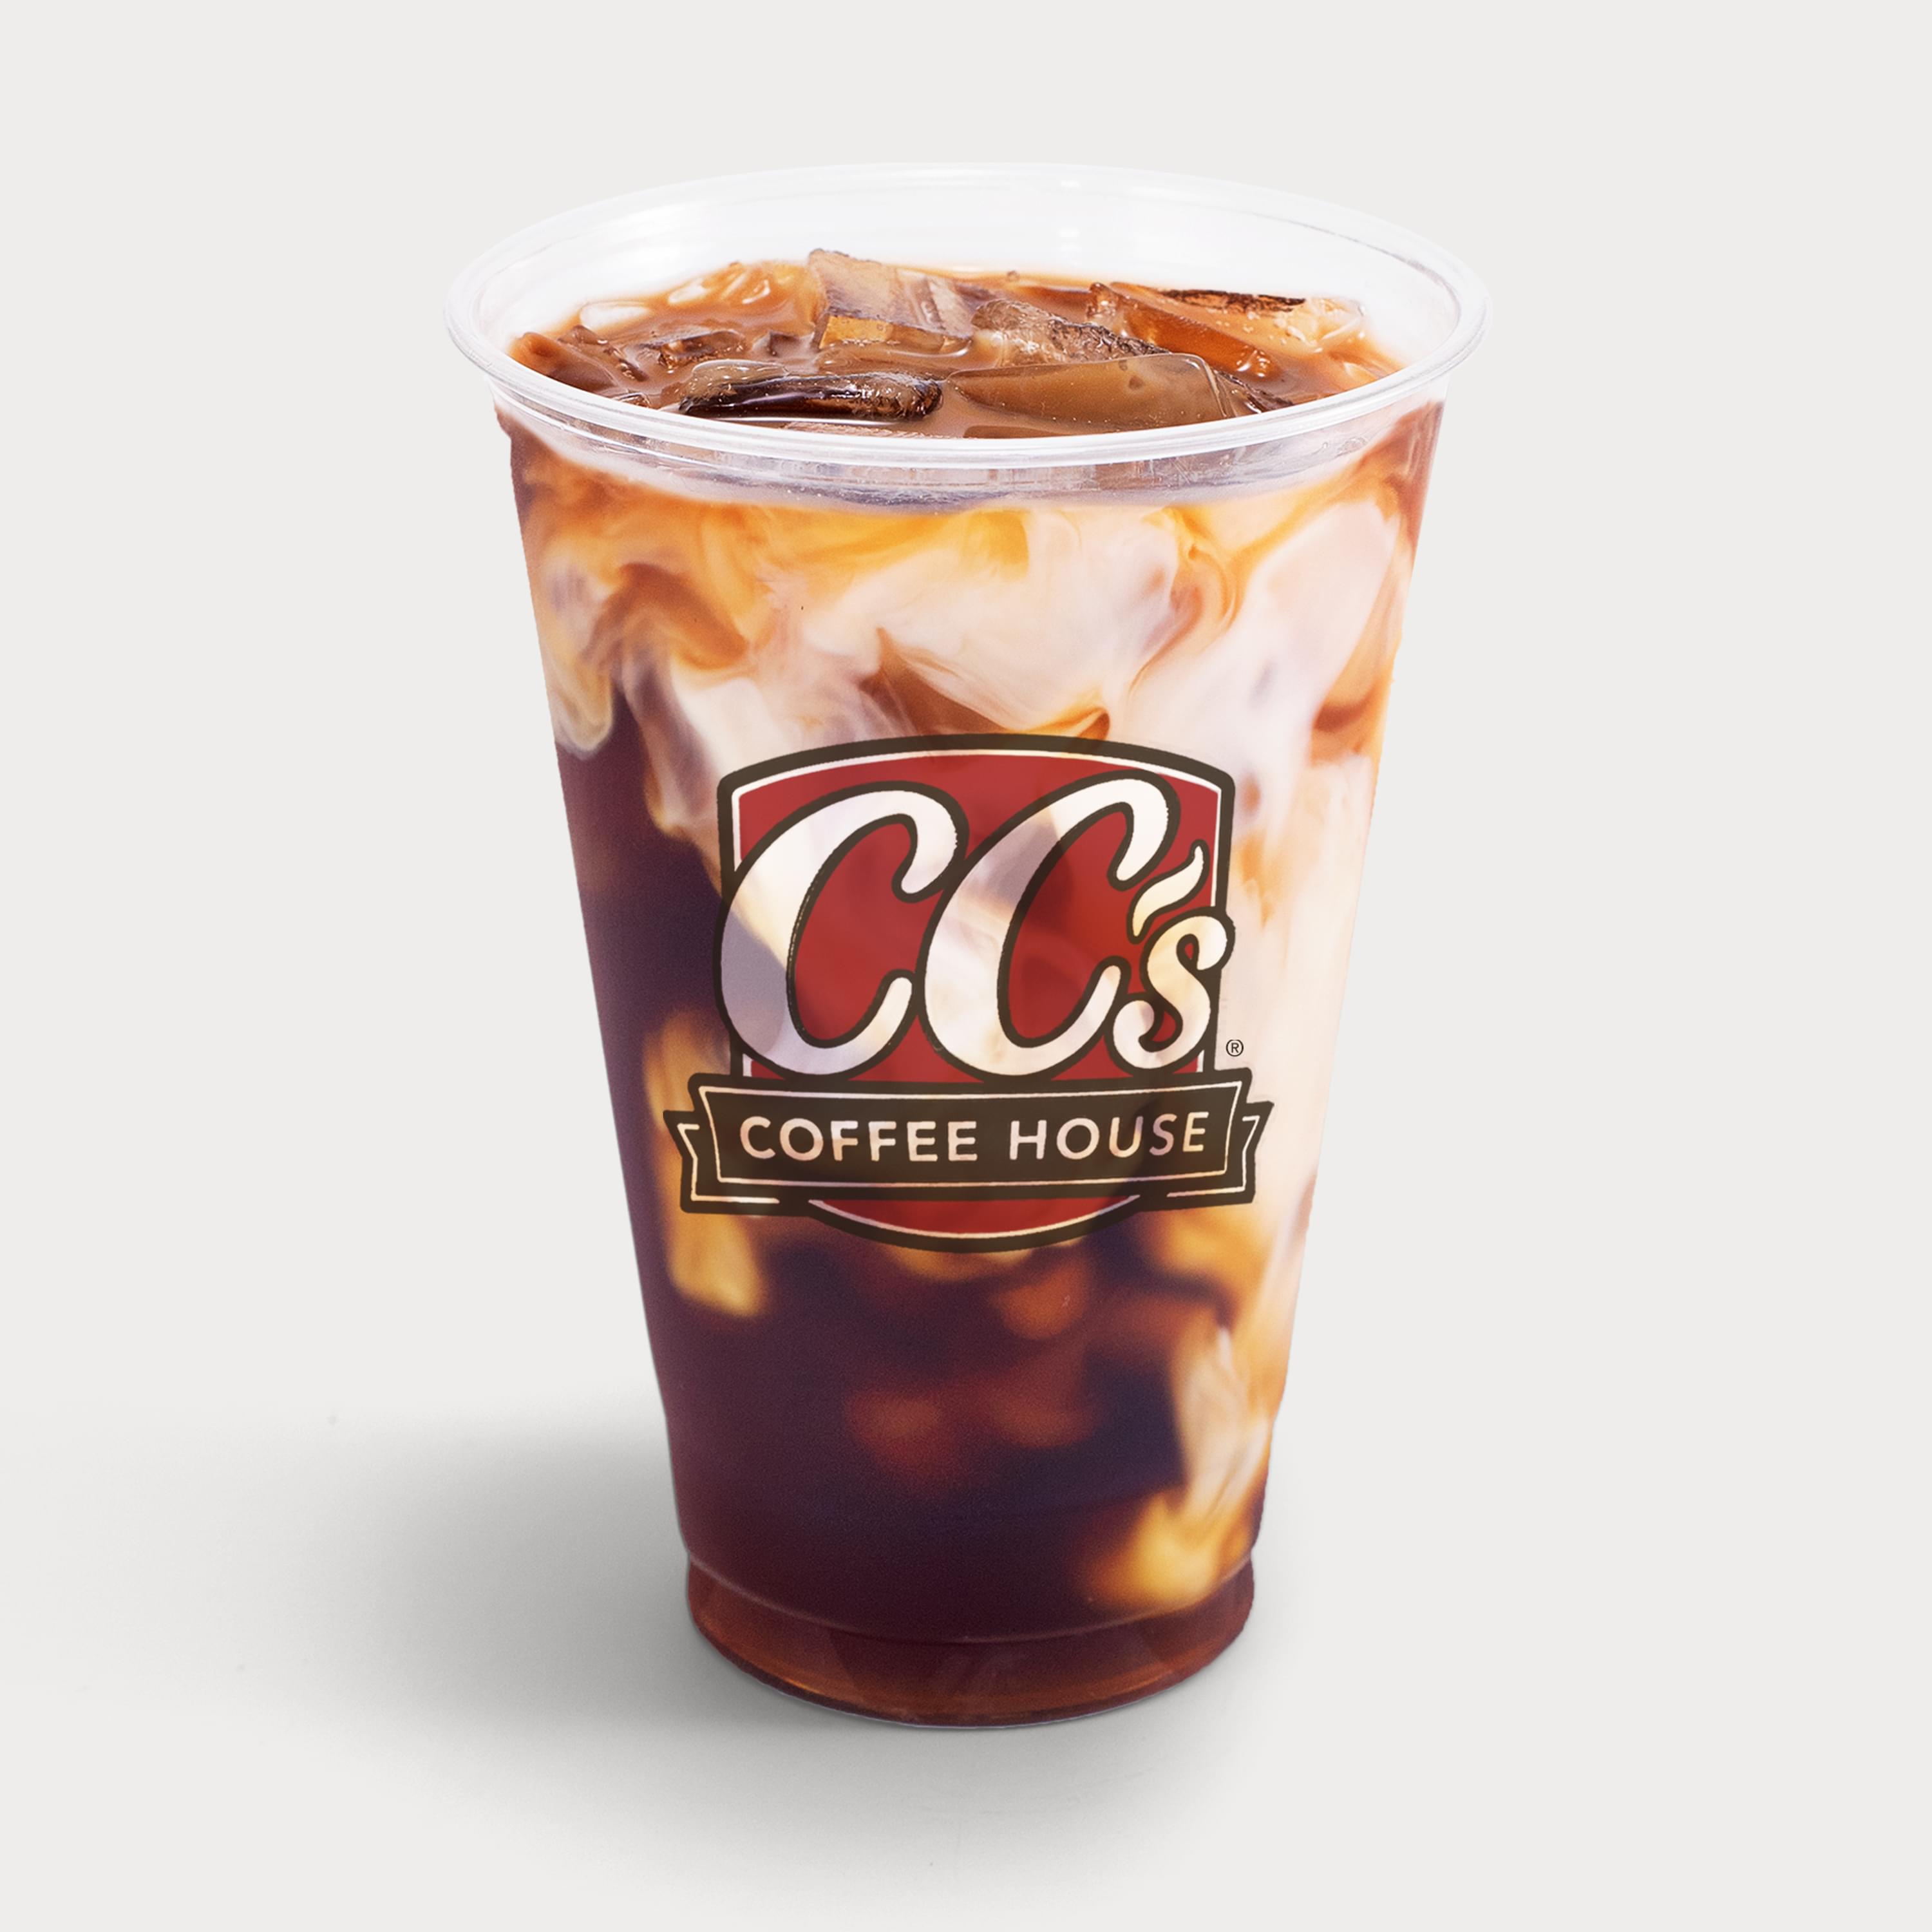 A cup of CC's cold brew coffee